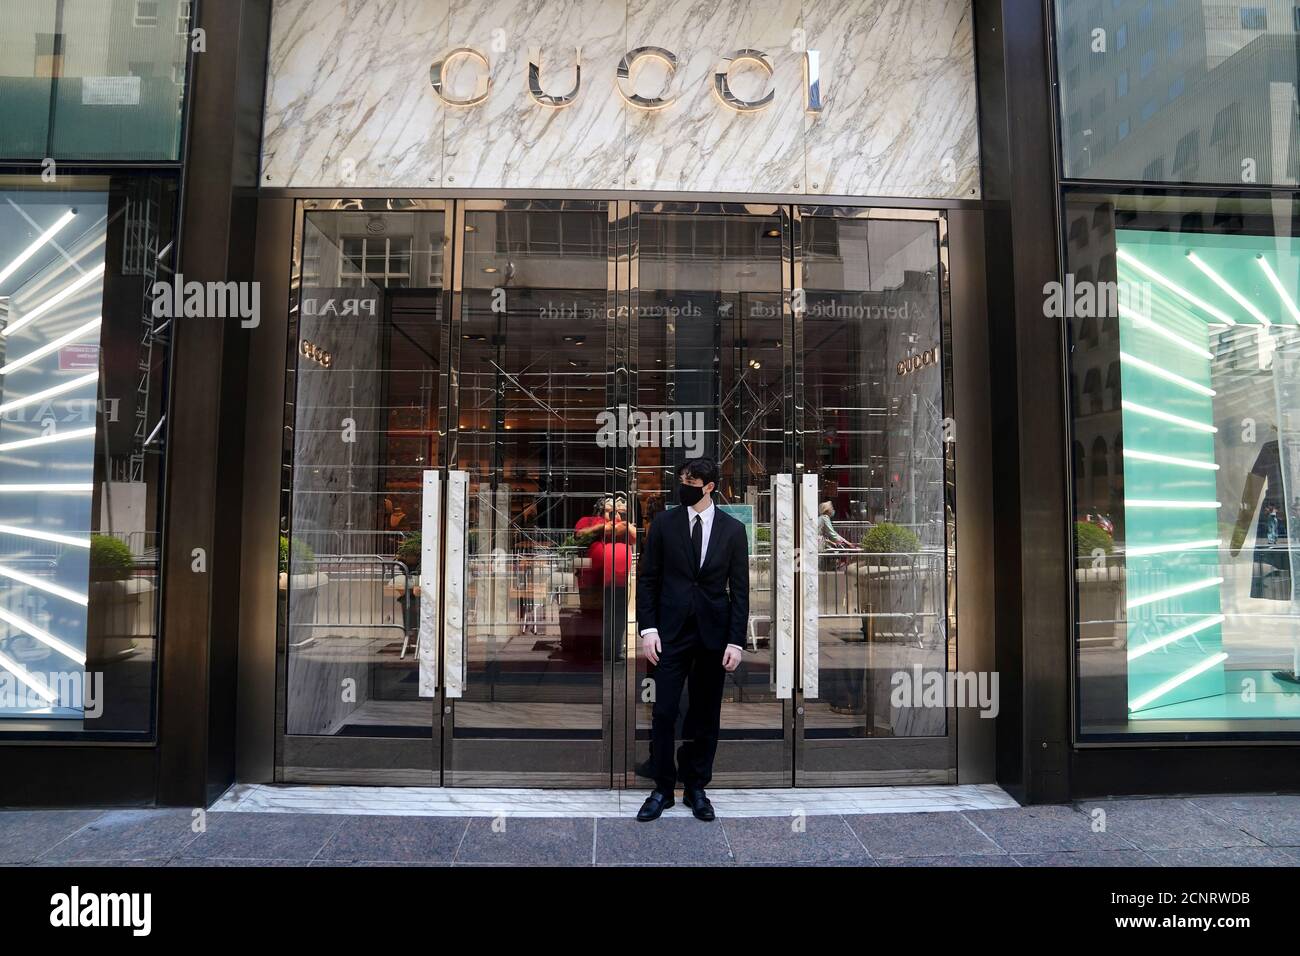 An employee stands outside a Gucci store on the first day of the phase two  re-opening of businesses following the outbreak of the coronavirus disease  (COVID-19), in the Manhattan borough of New